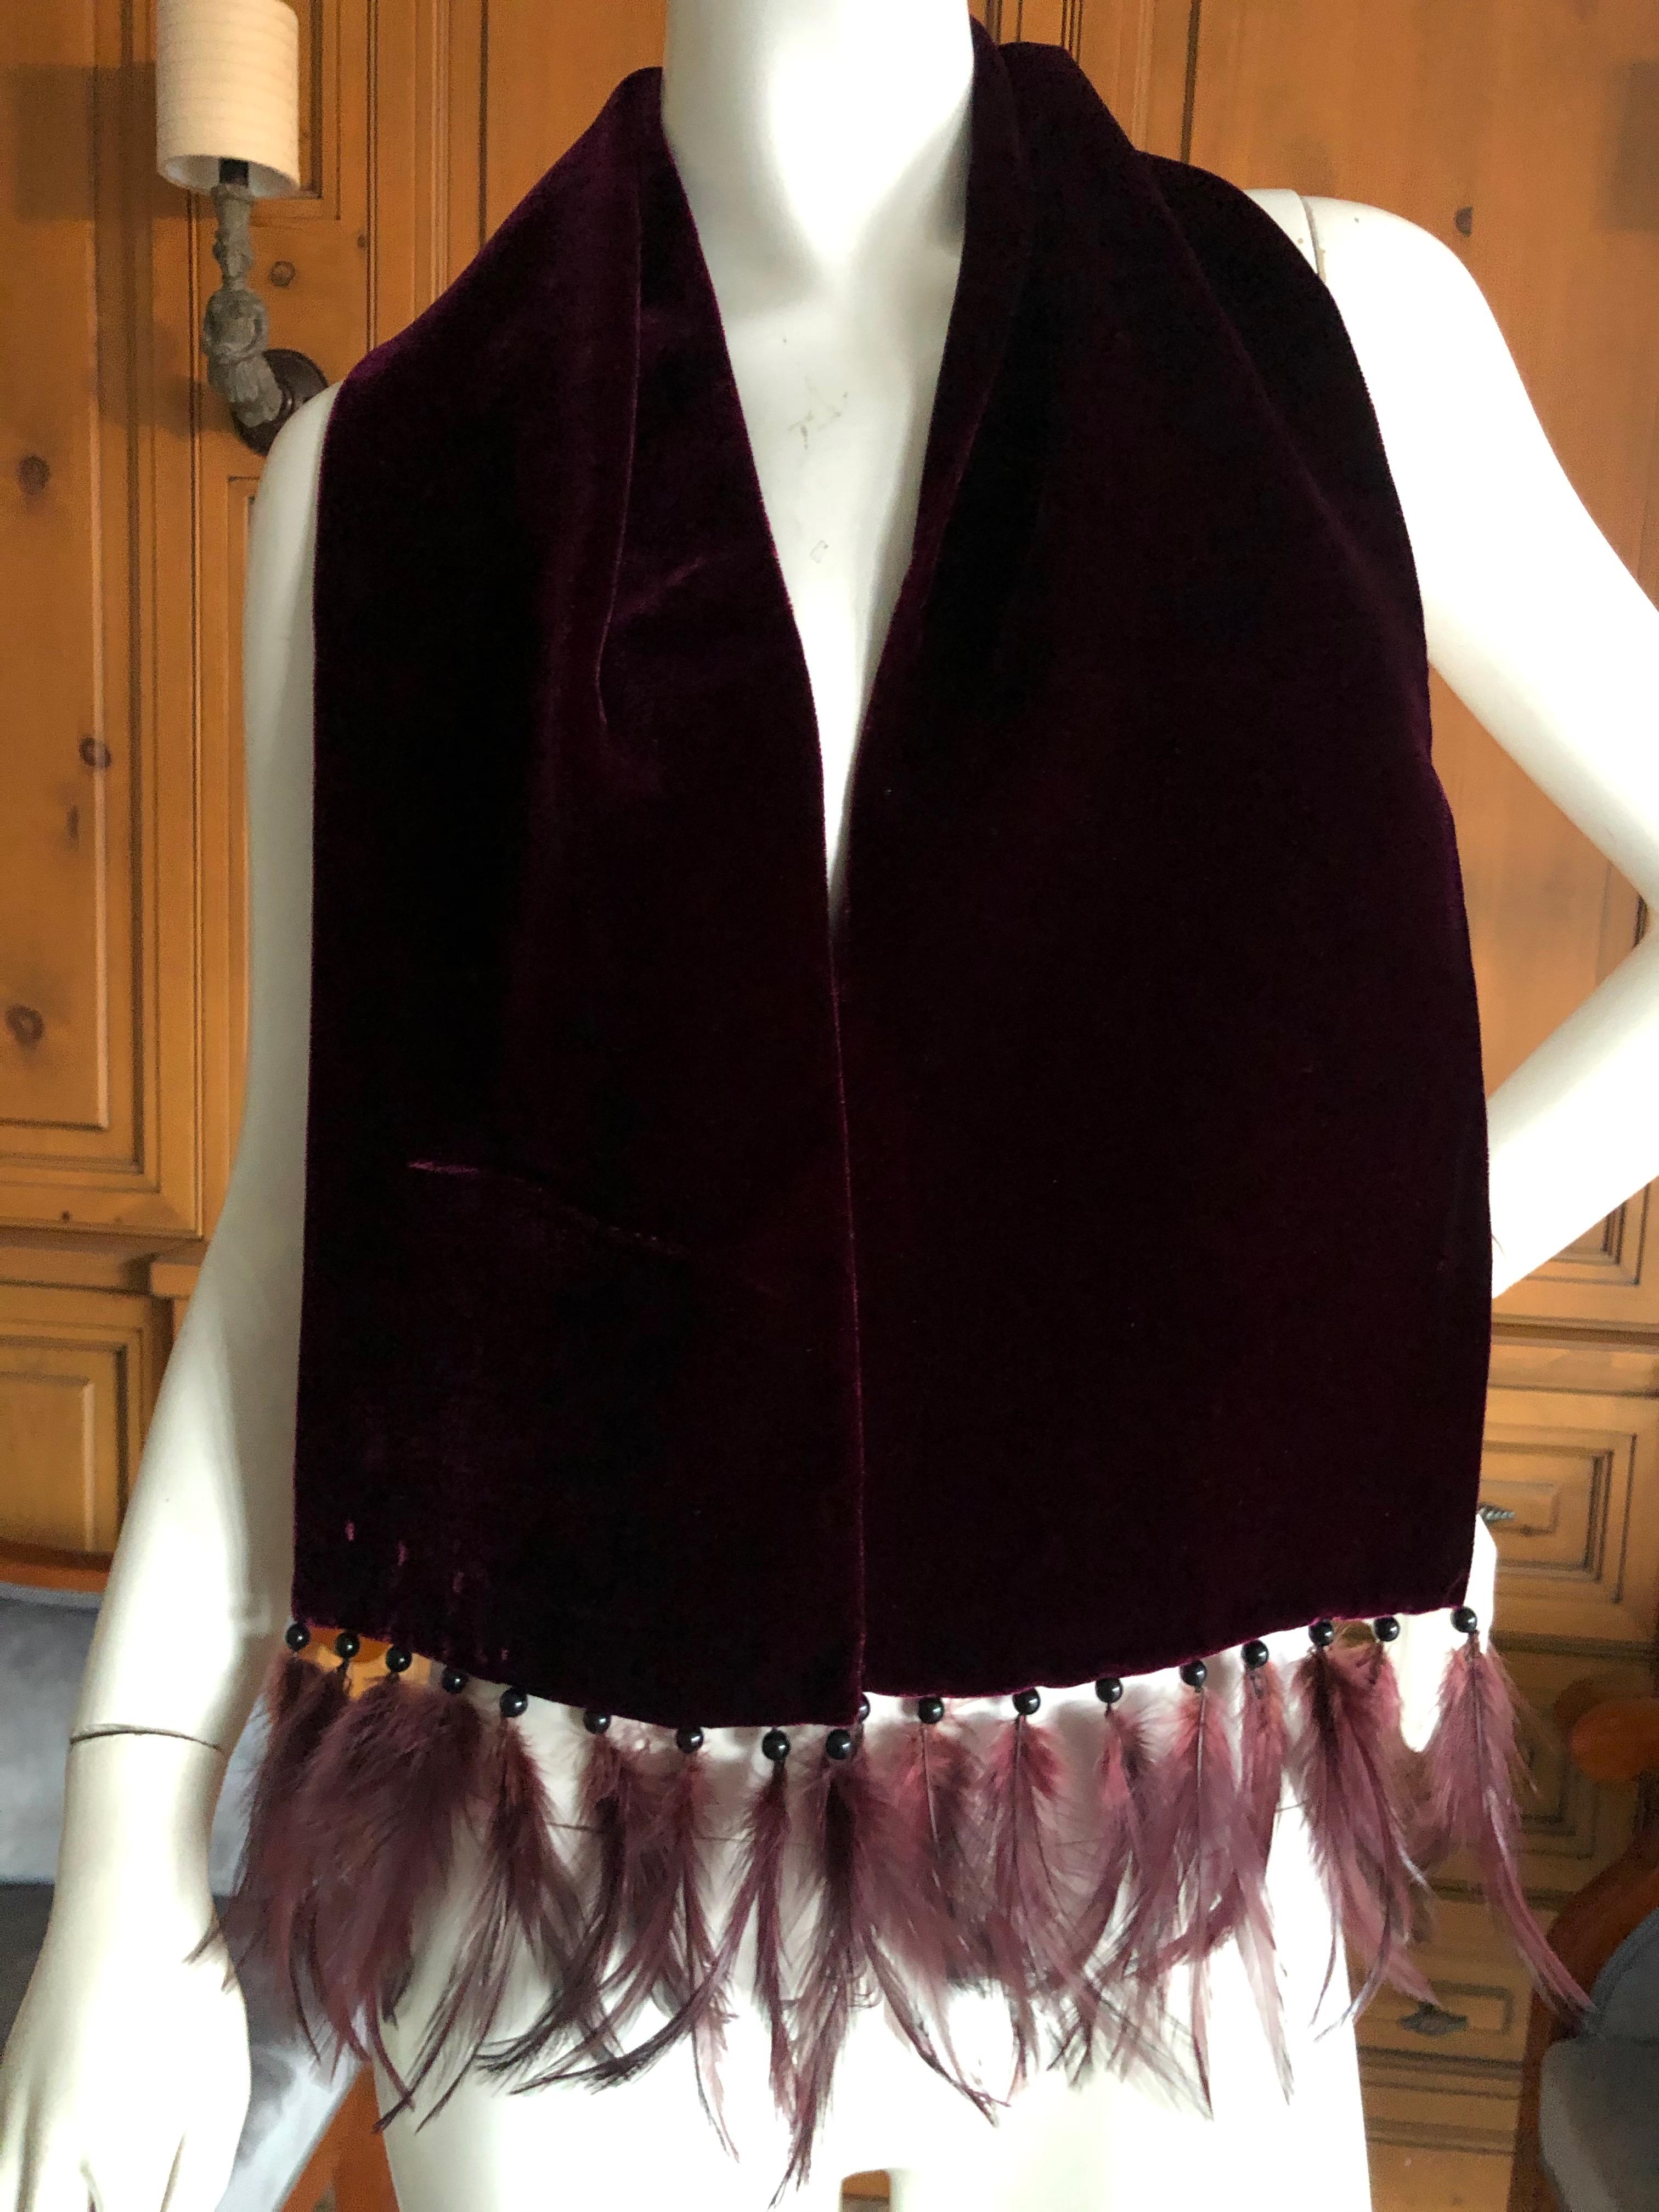 Yves Saint Laurent Rive Guache Vintage Burgundy Velvet Scarf w Feather Accents In Excellent Condition For Sale In Cloverdale, CA